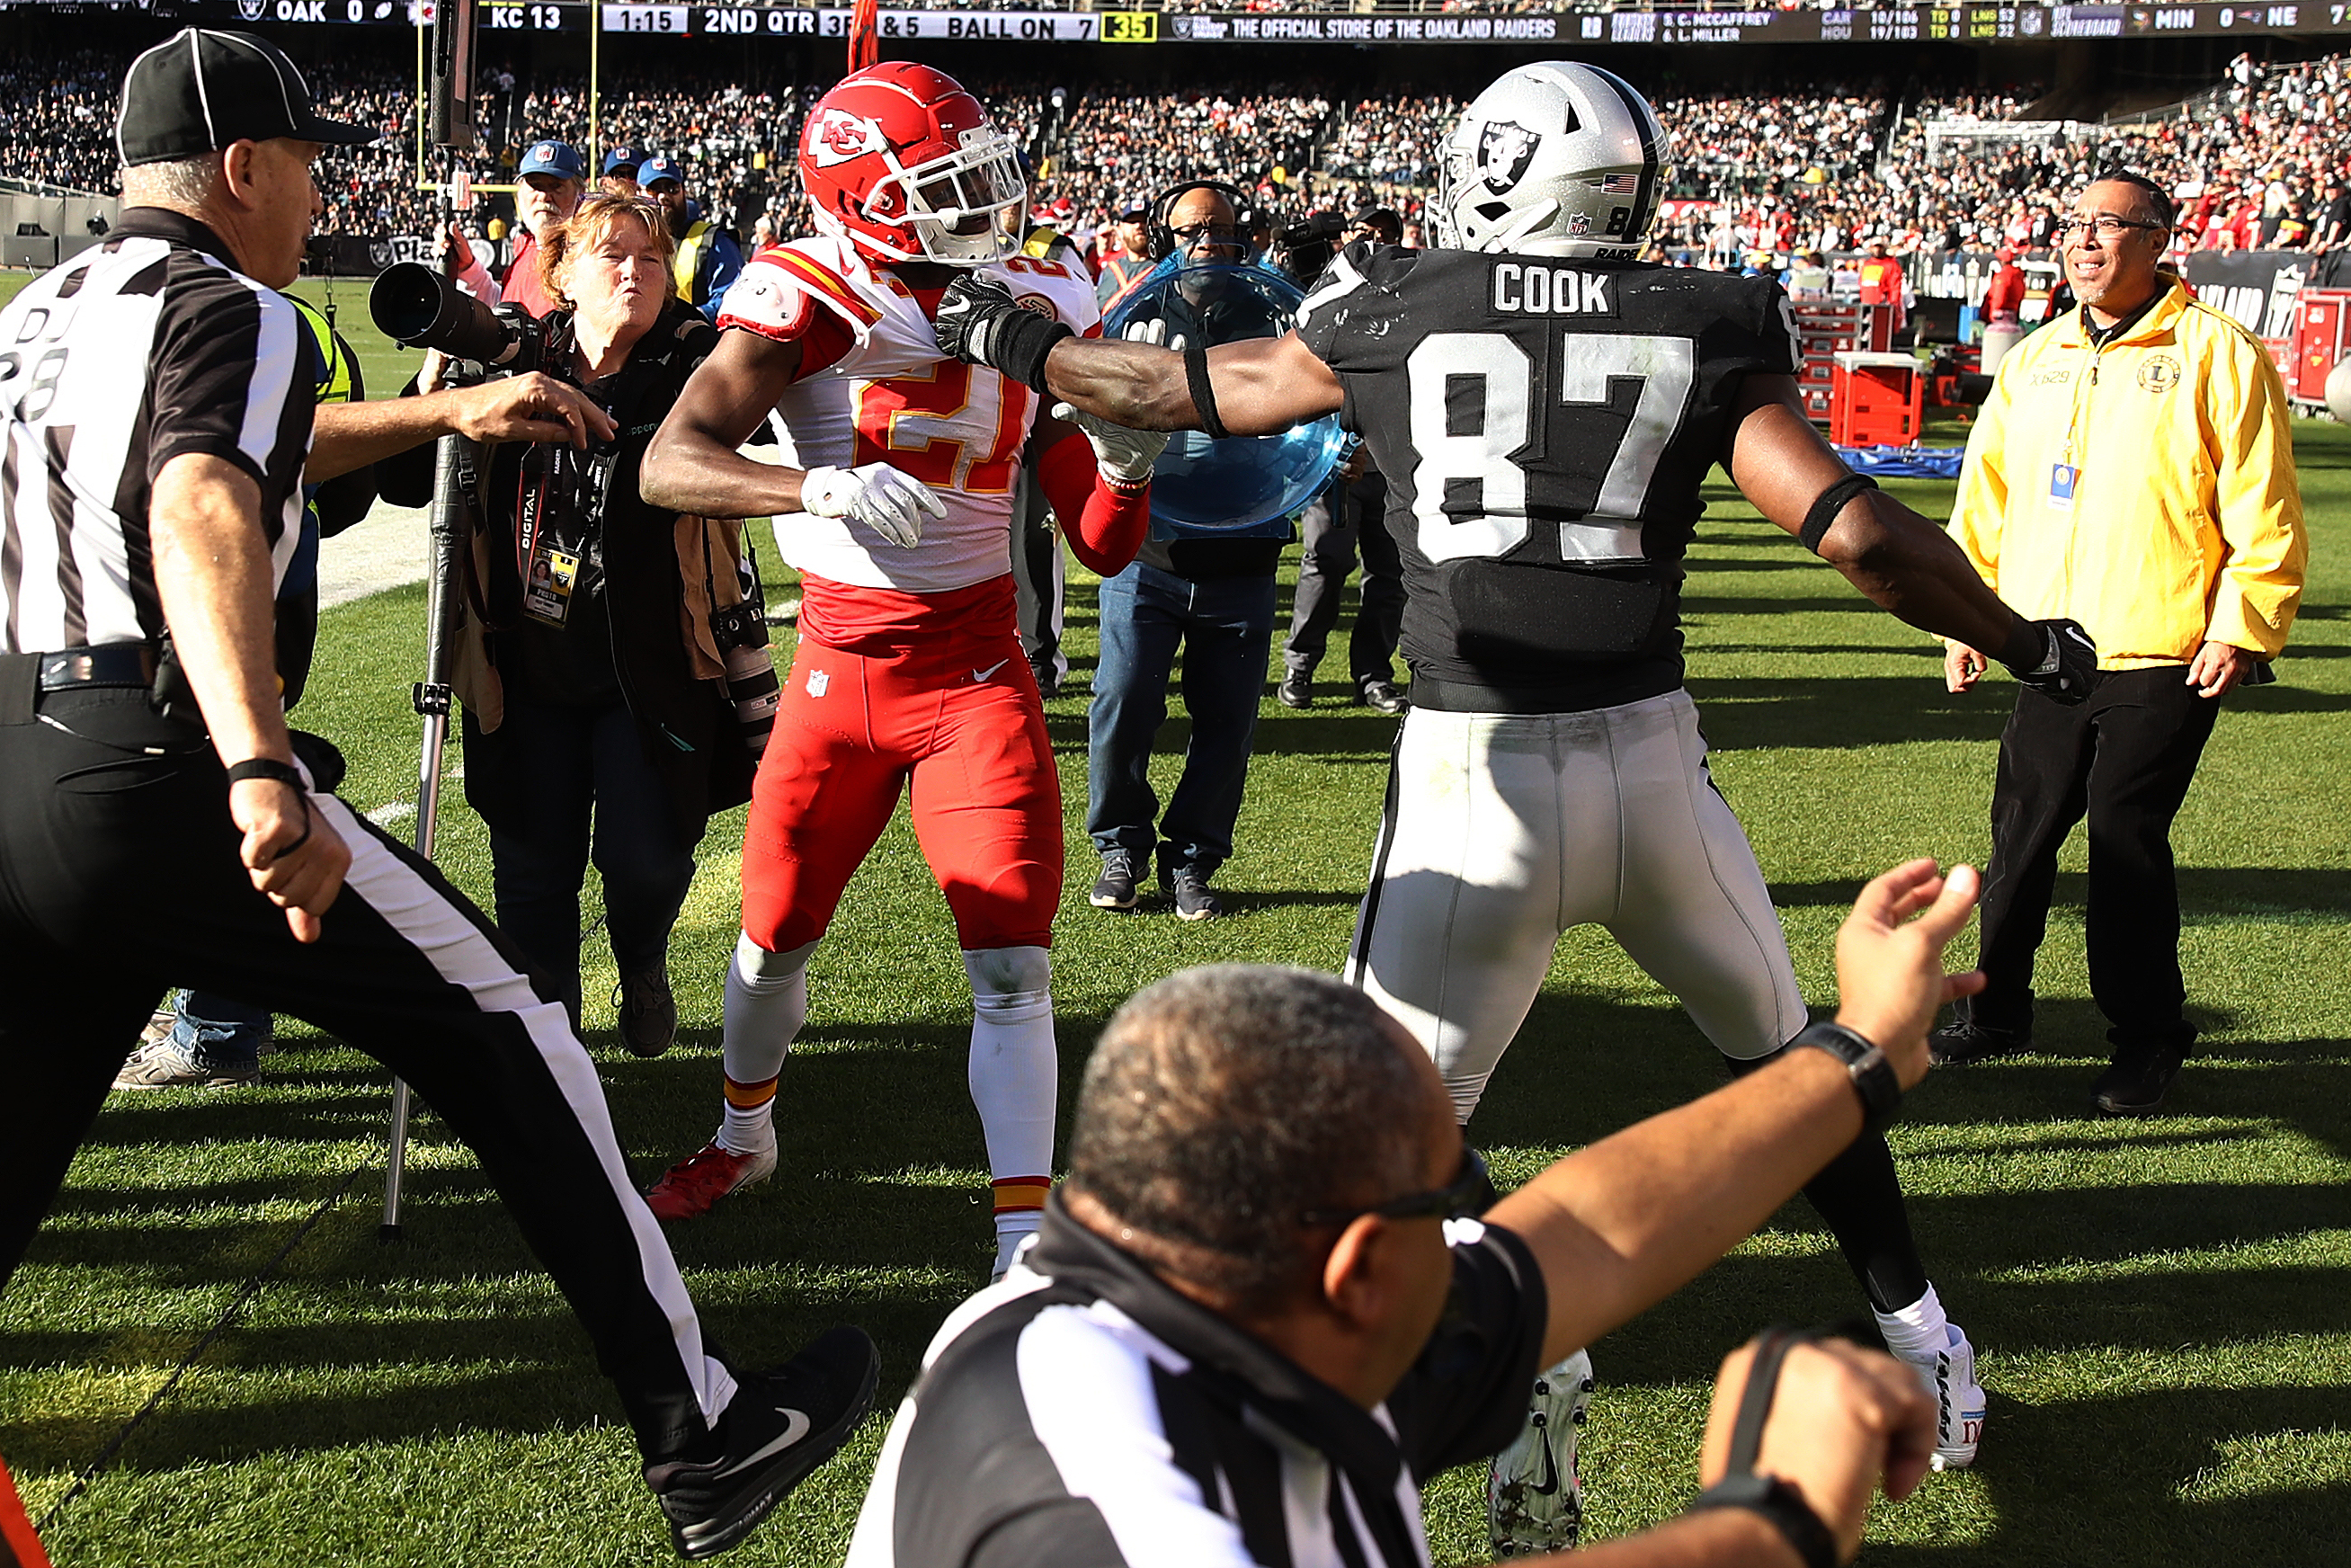 Raiders Blown Out by Seahawks in London, Fall to 1-5 – NBC Bay Area